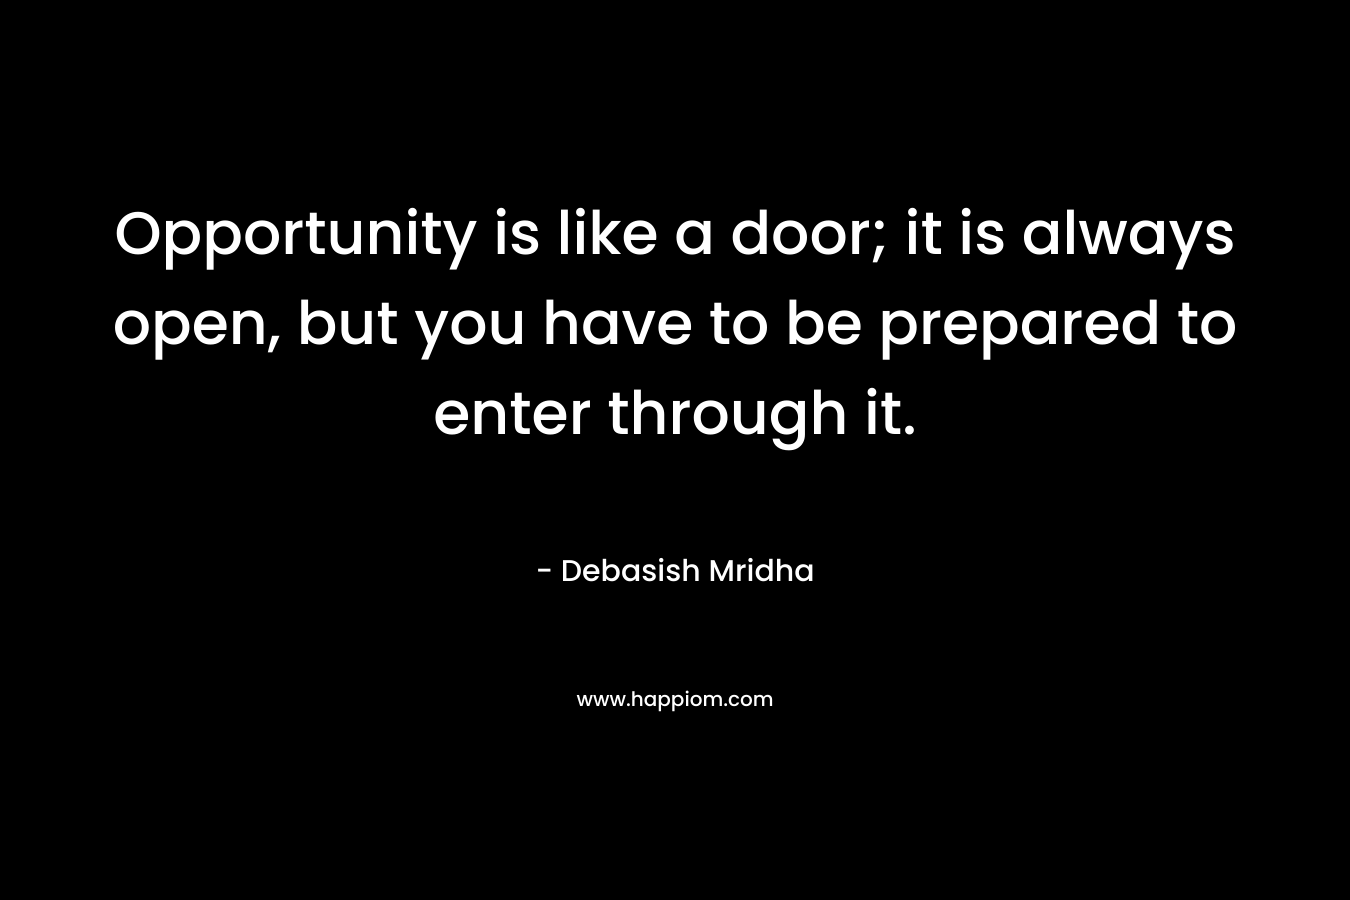 Opportunity is like a door; it is always open, but you have to be prepared to enter through it.